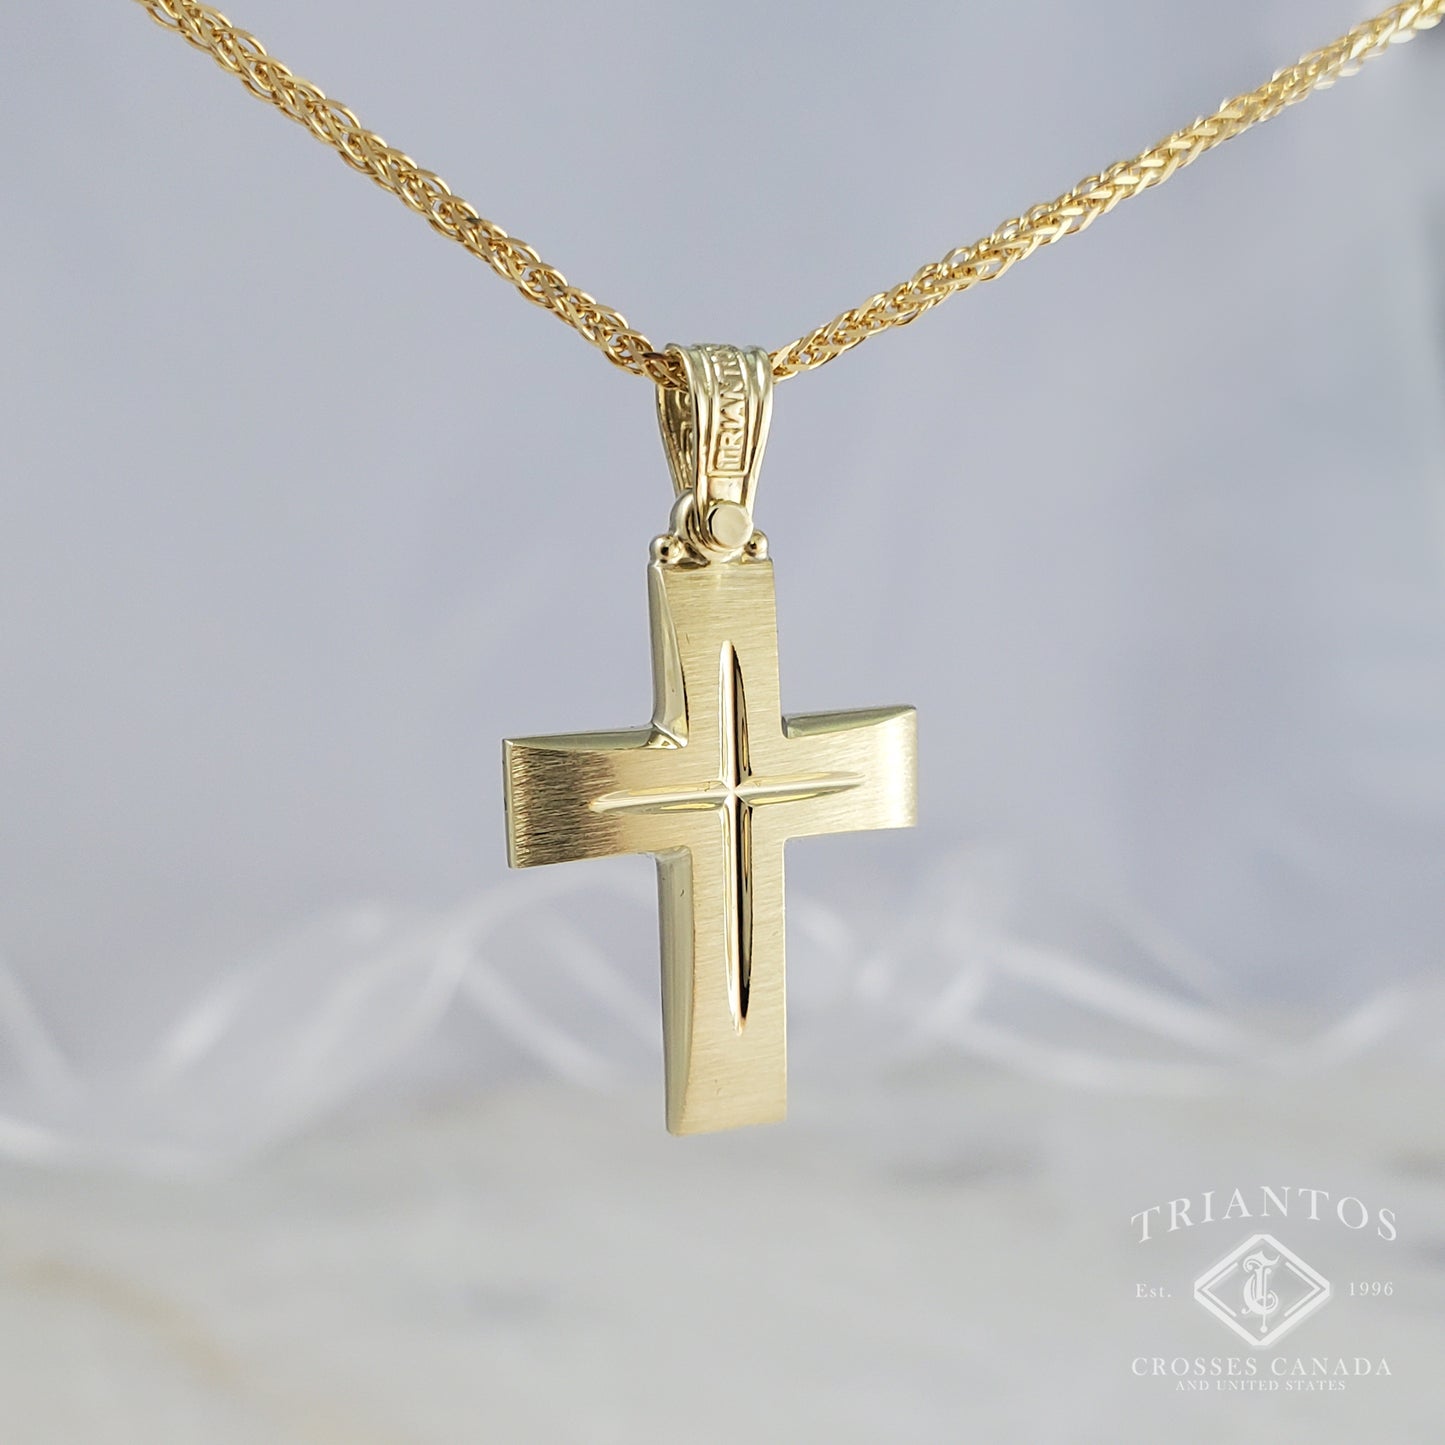 Solid Triantos 14K Gold Orthodox Christian cross with brush-stroke like finish. In the middle a Chiseled Polish Cross for design in white gold.